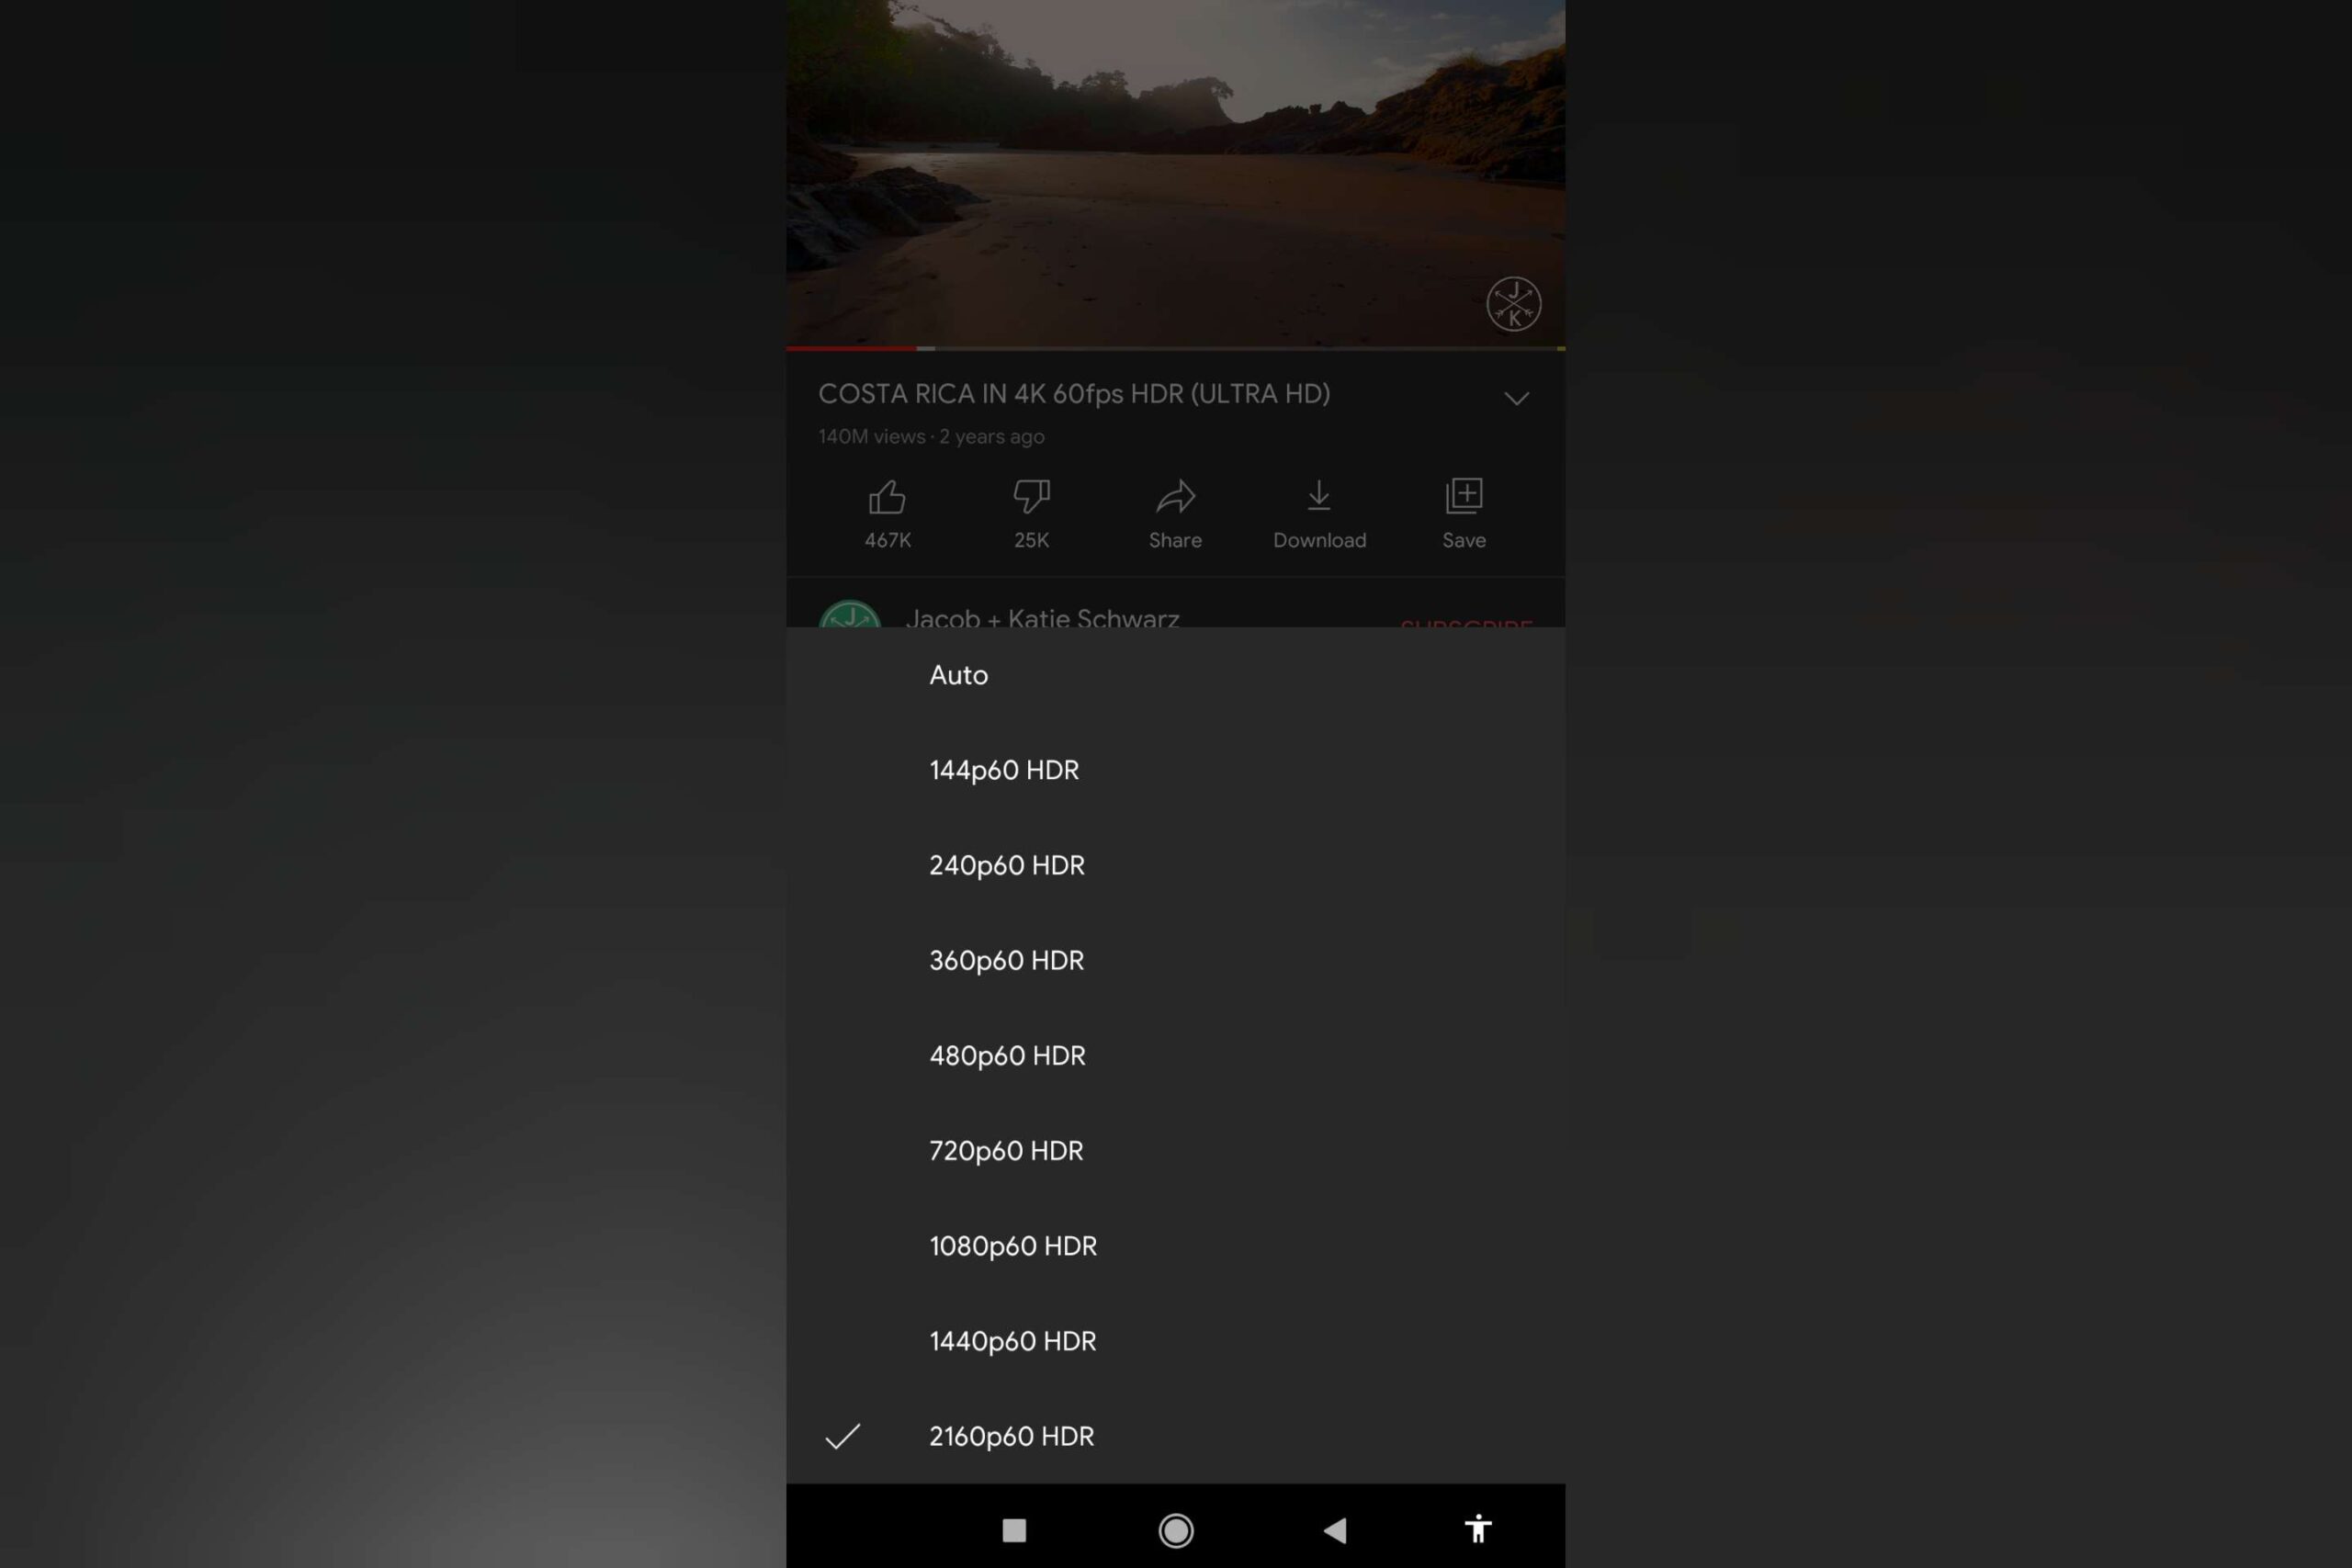 YouTube - Android